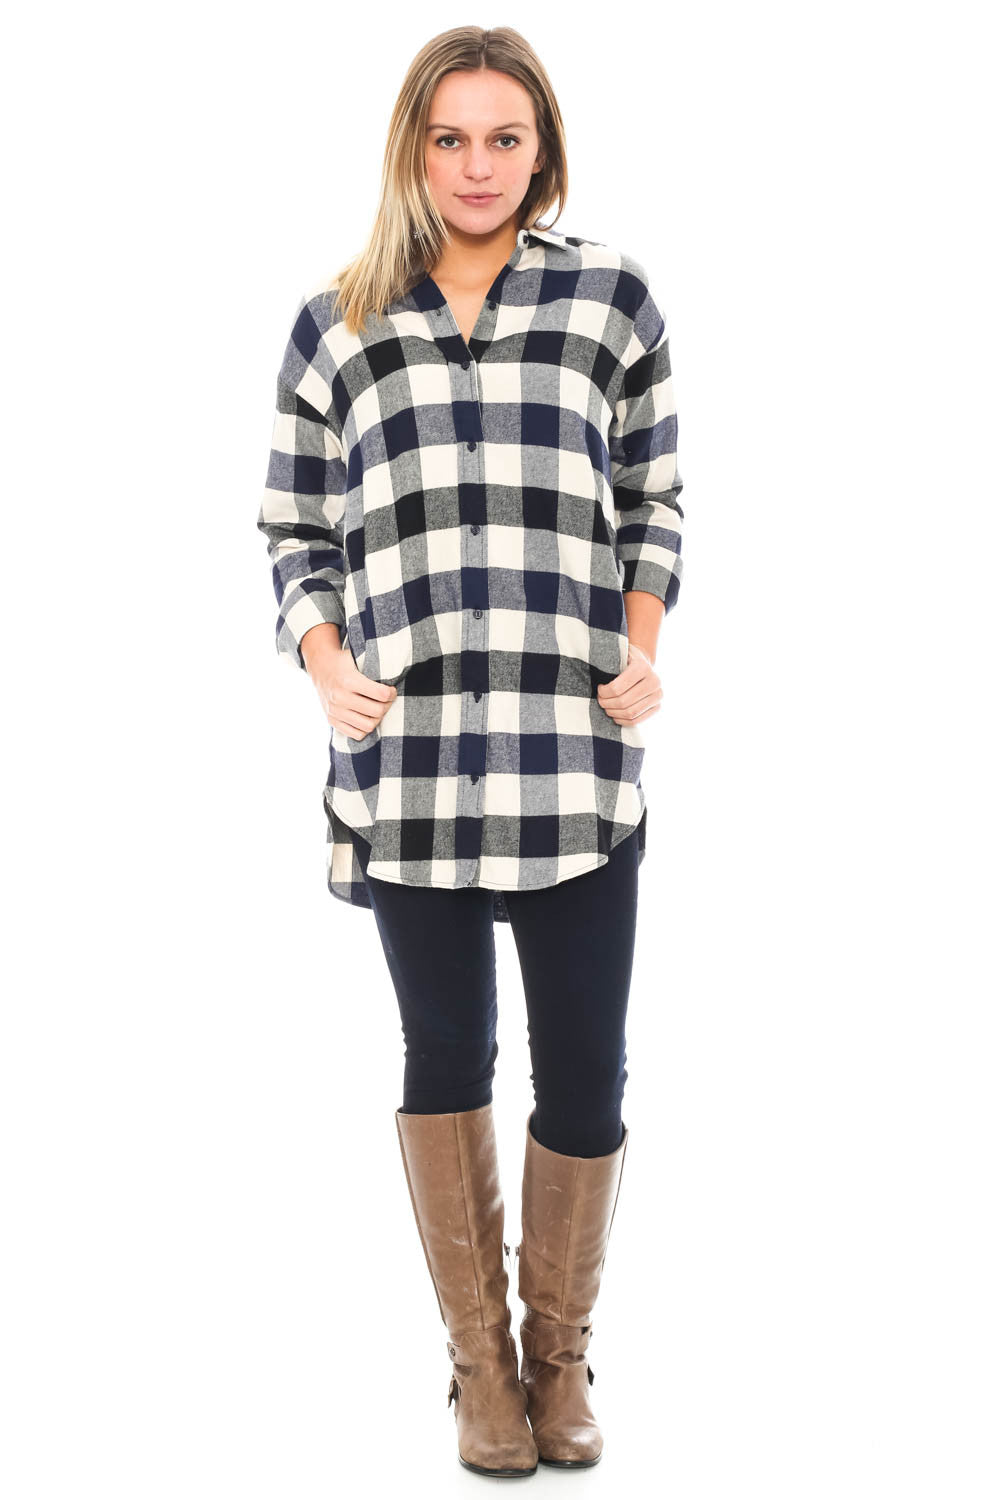 Tunic - Plaid Button Up Top